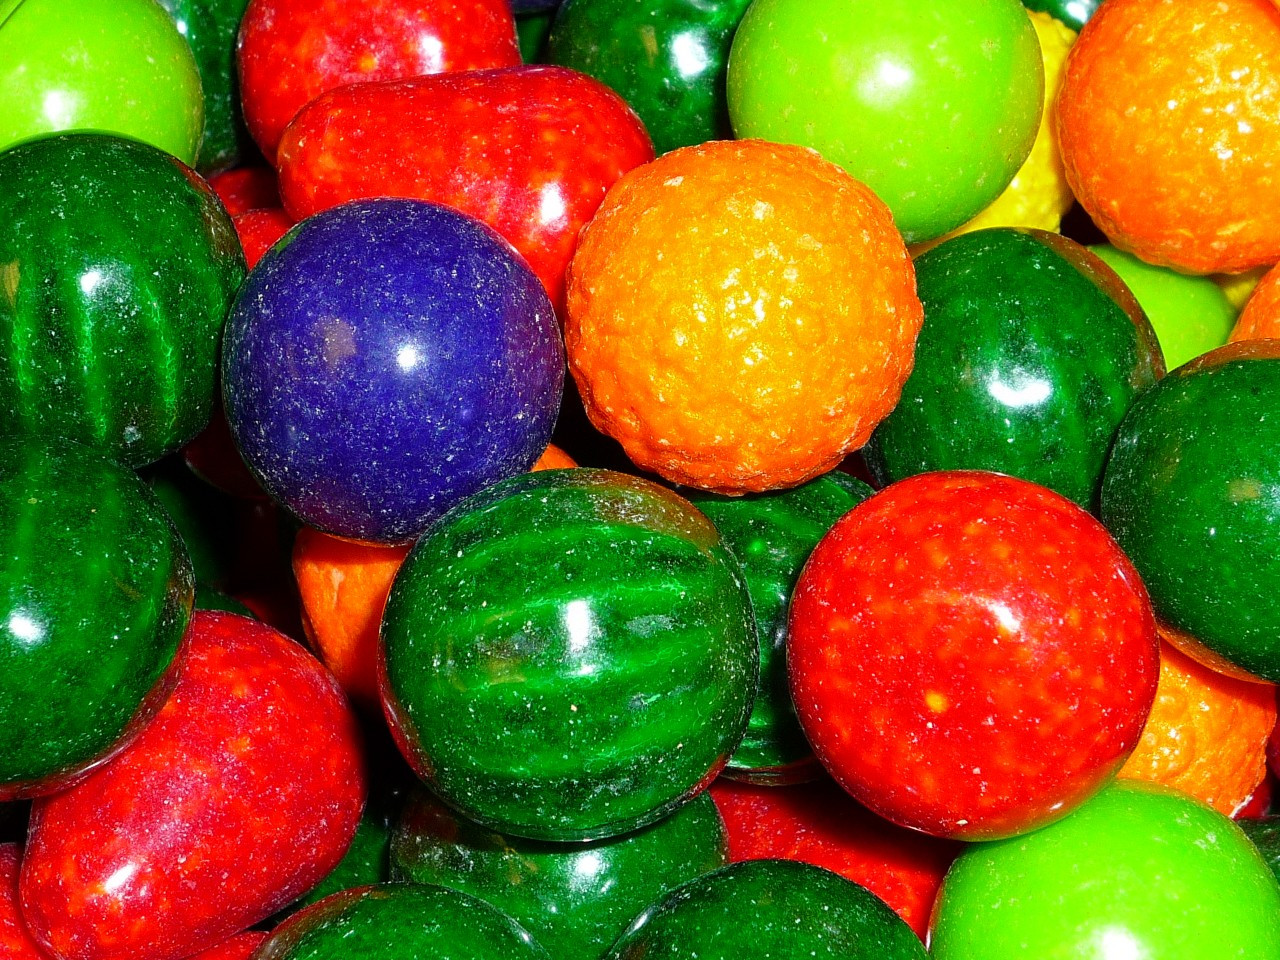 Seedlings Candy Filled Double Bubble Gum Balls 1LB (453g) About 48 pieces